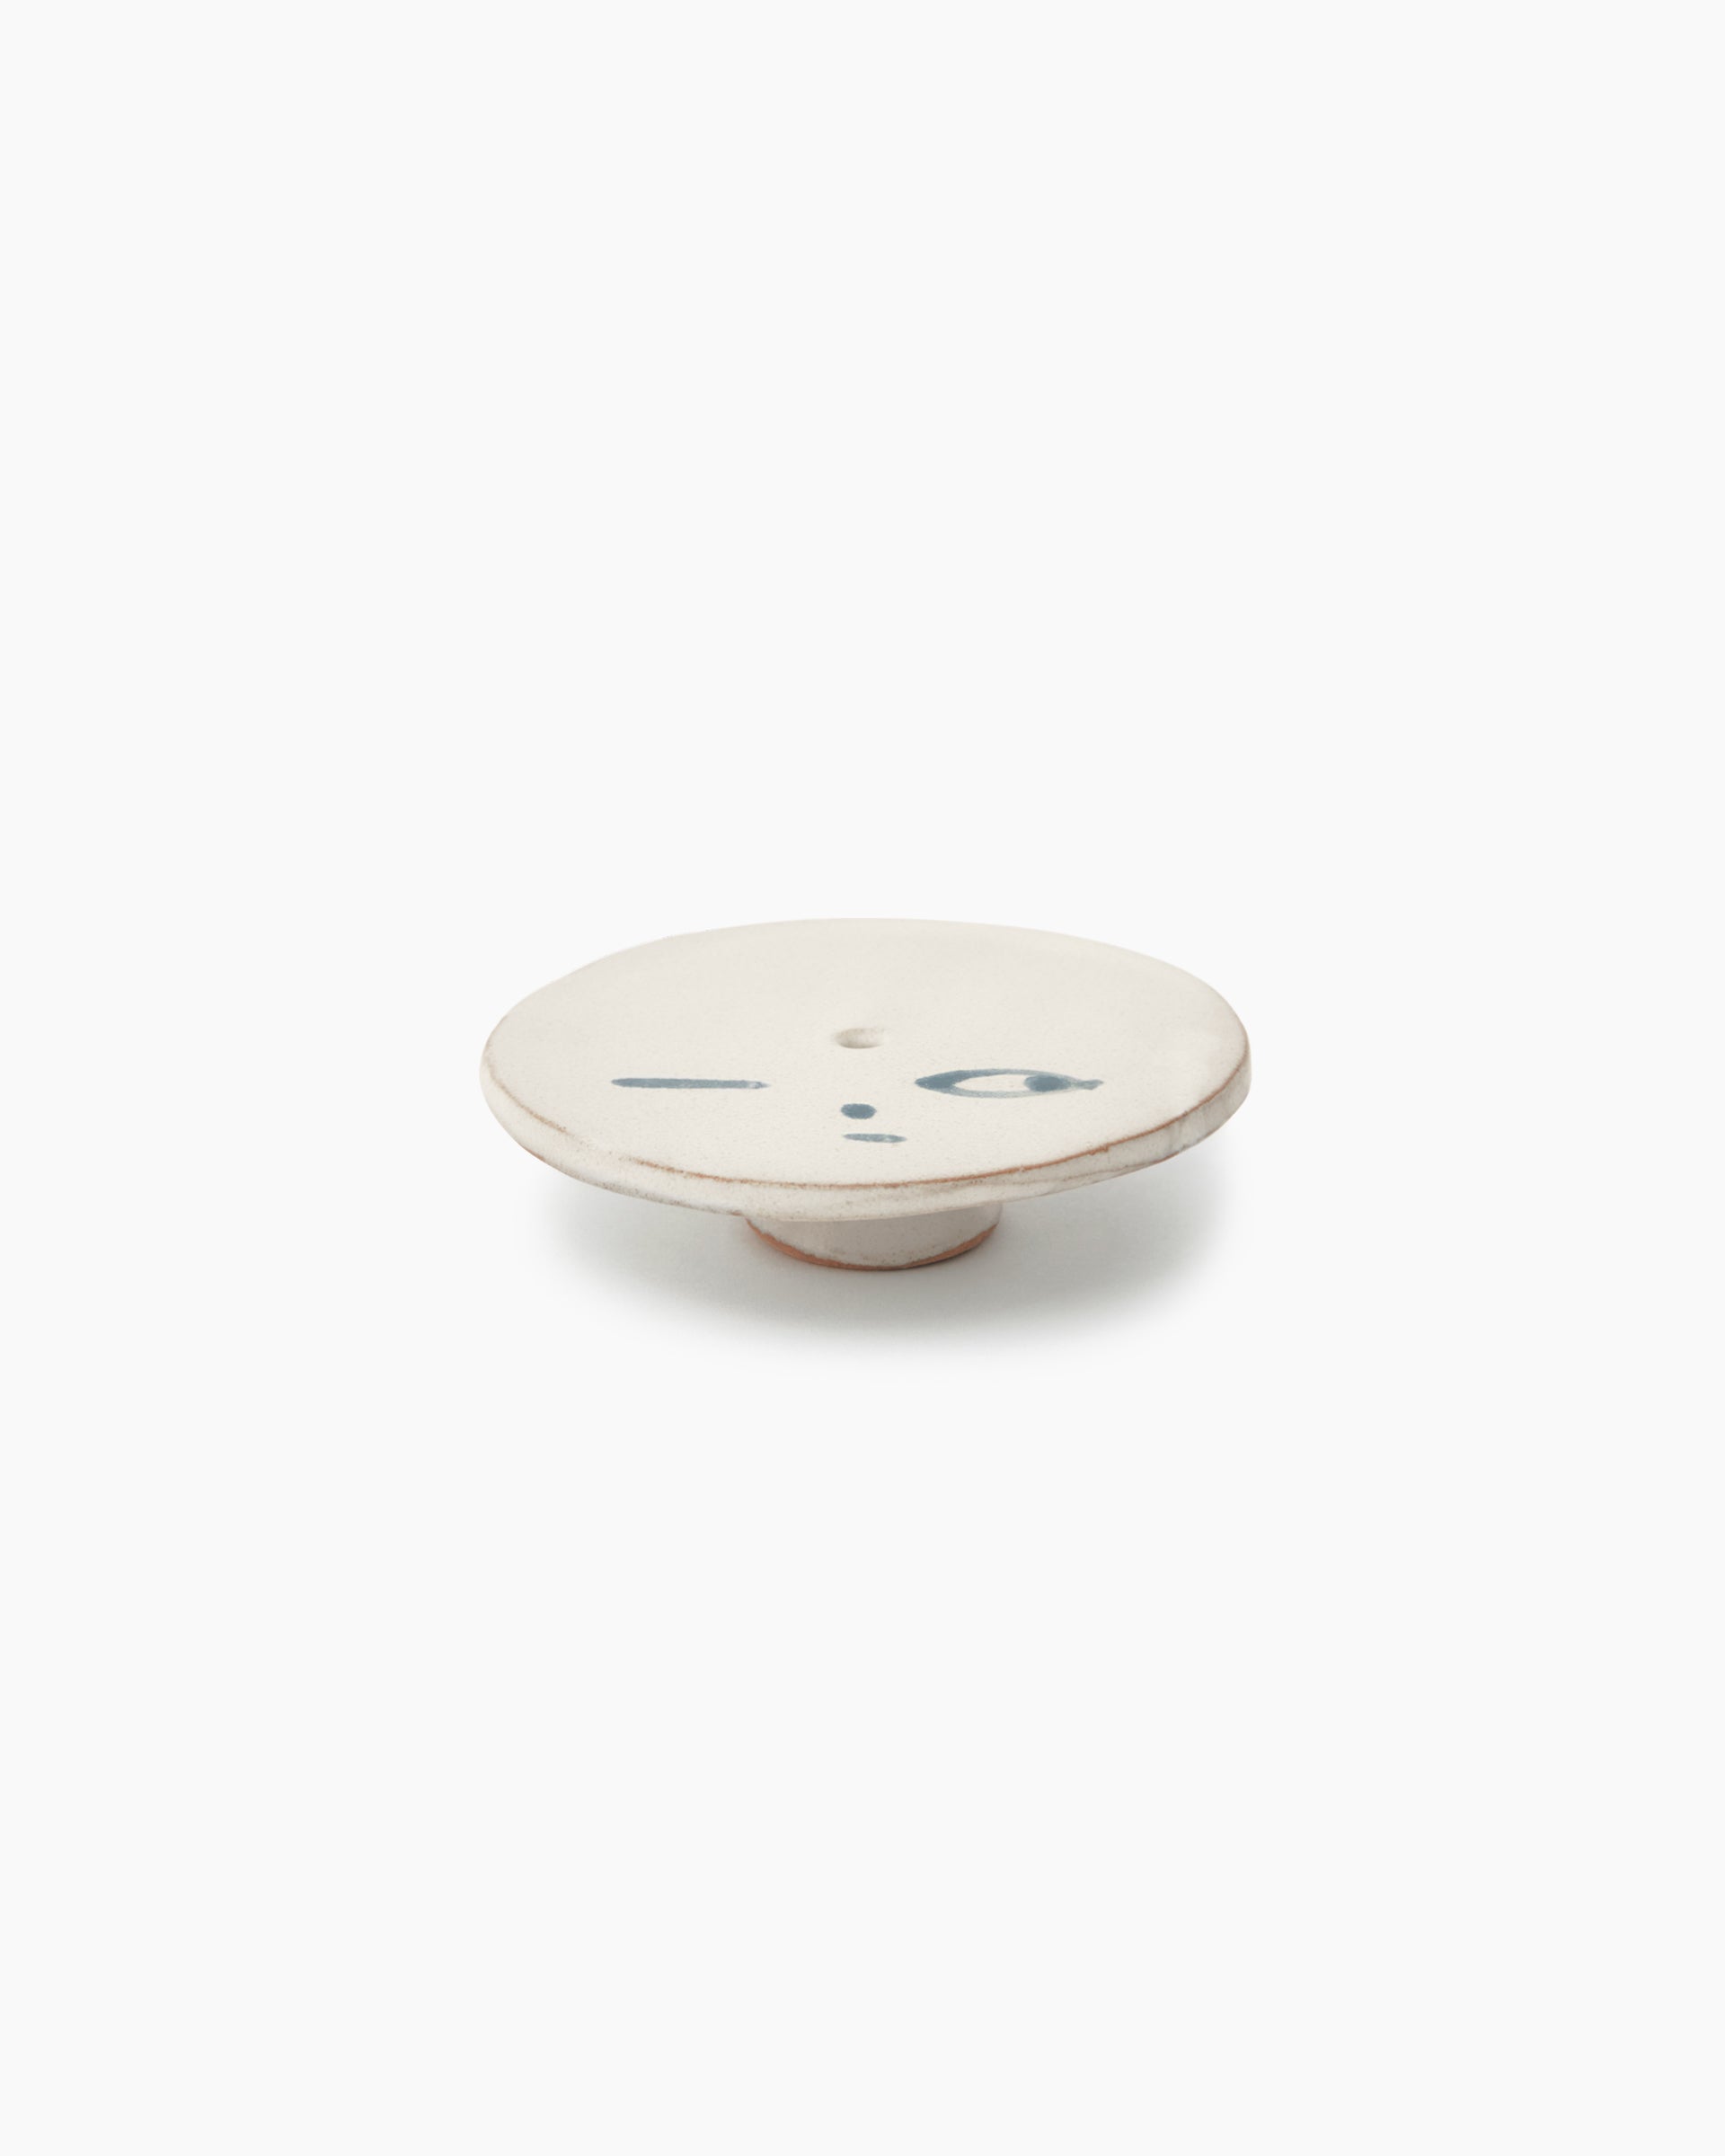 Incense Holder With Conic Base